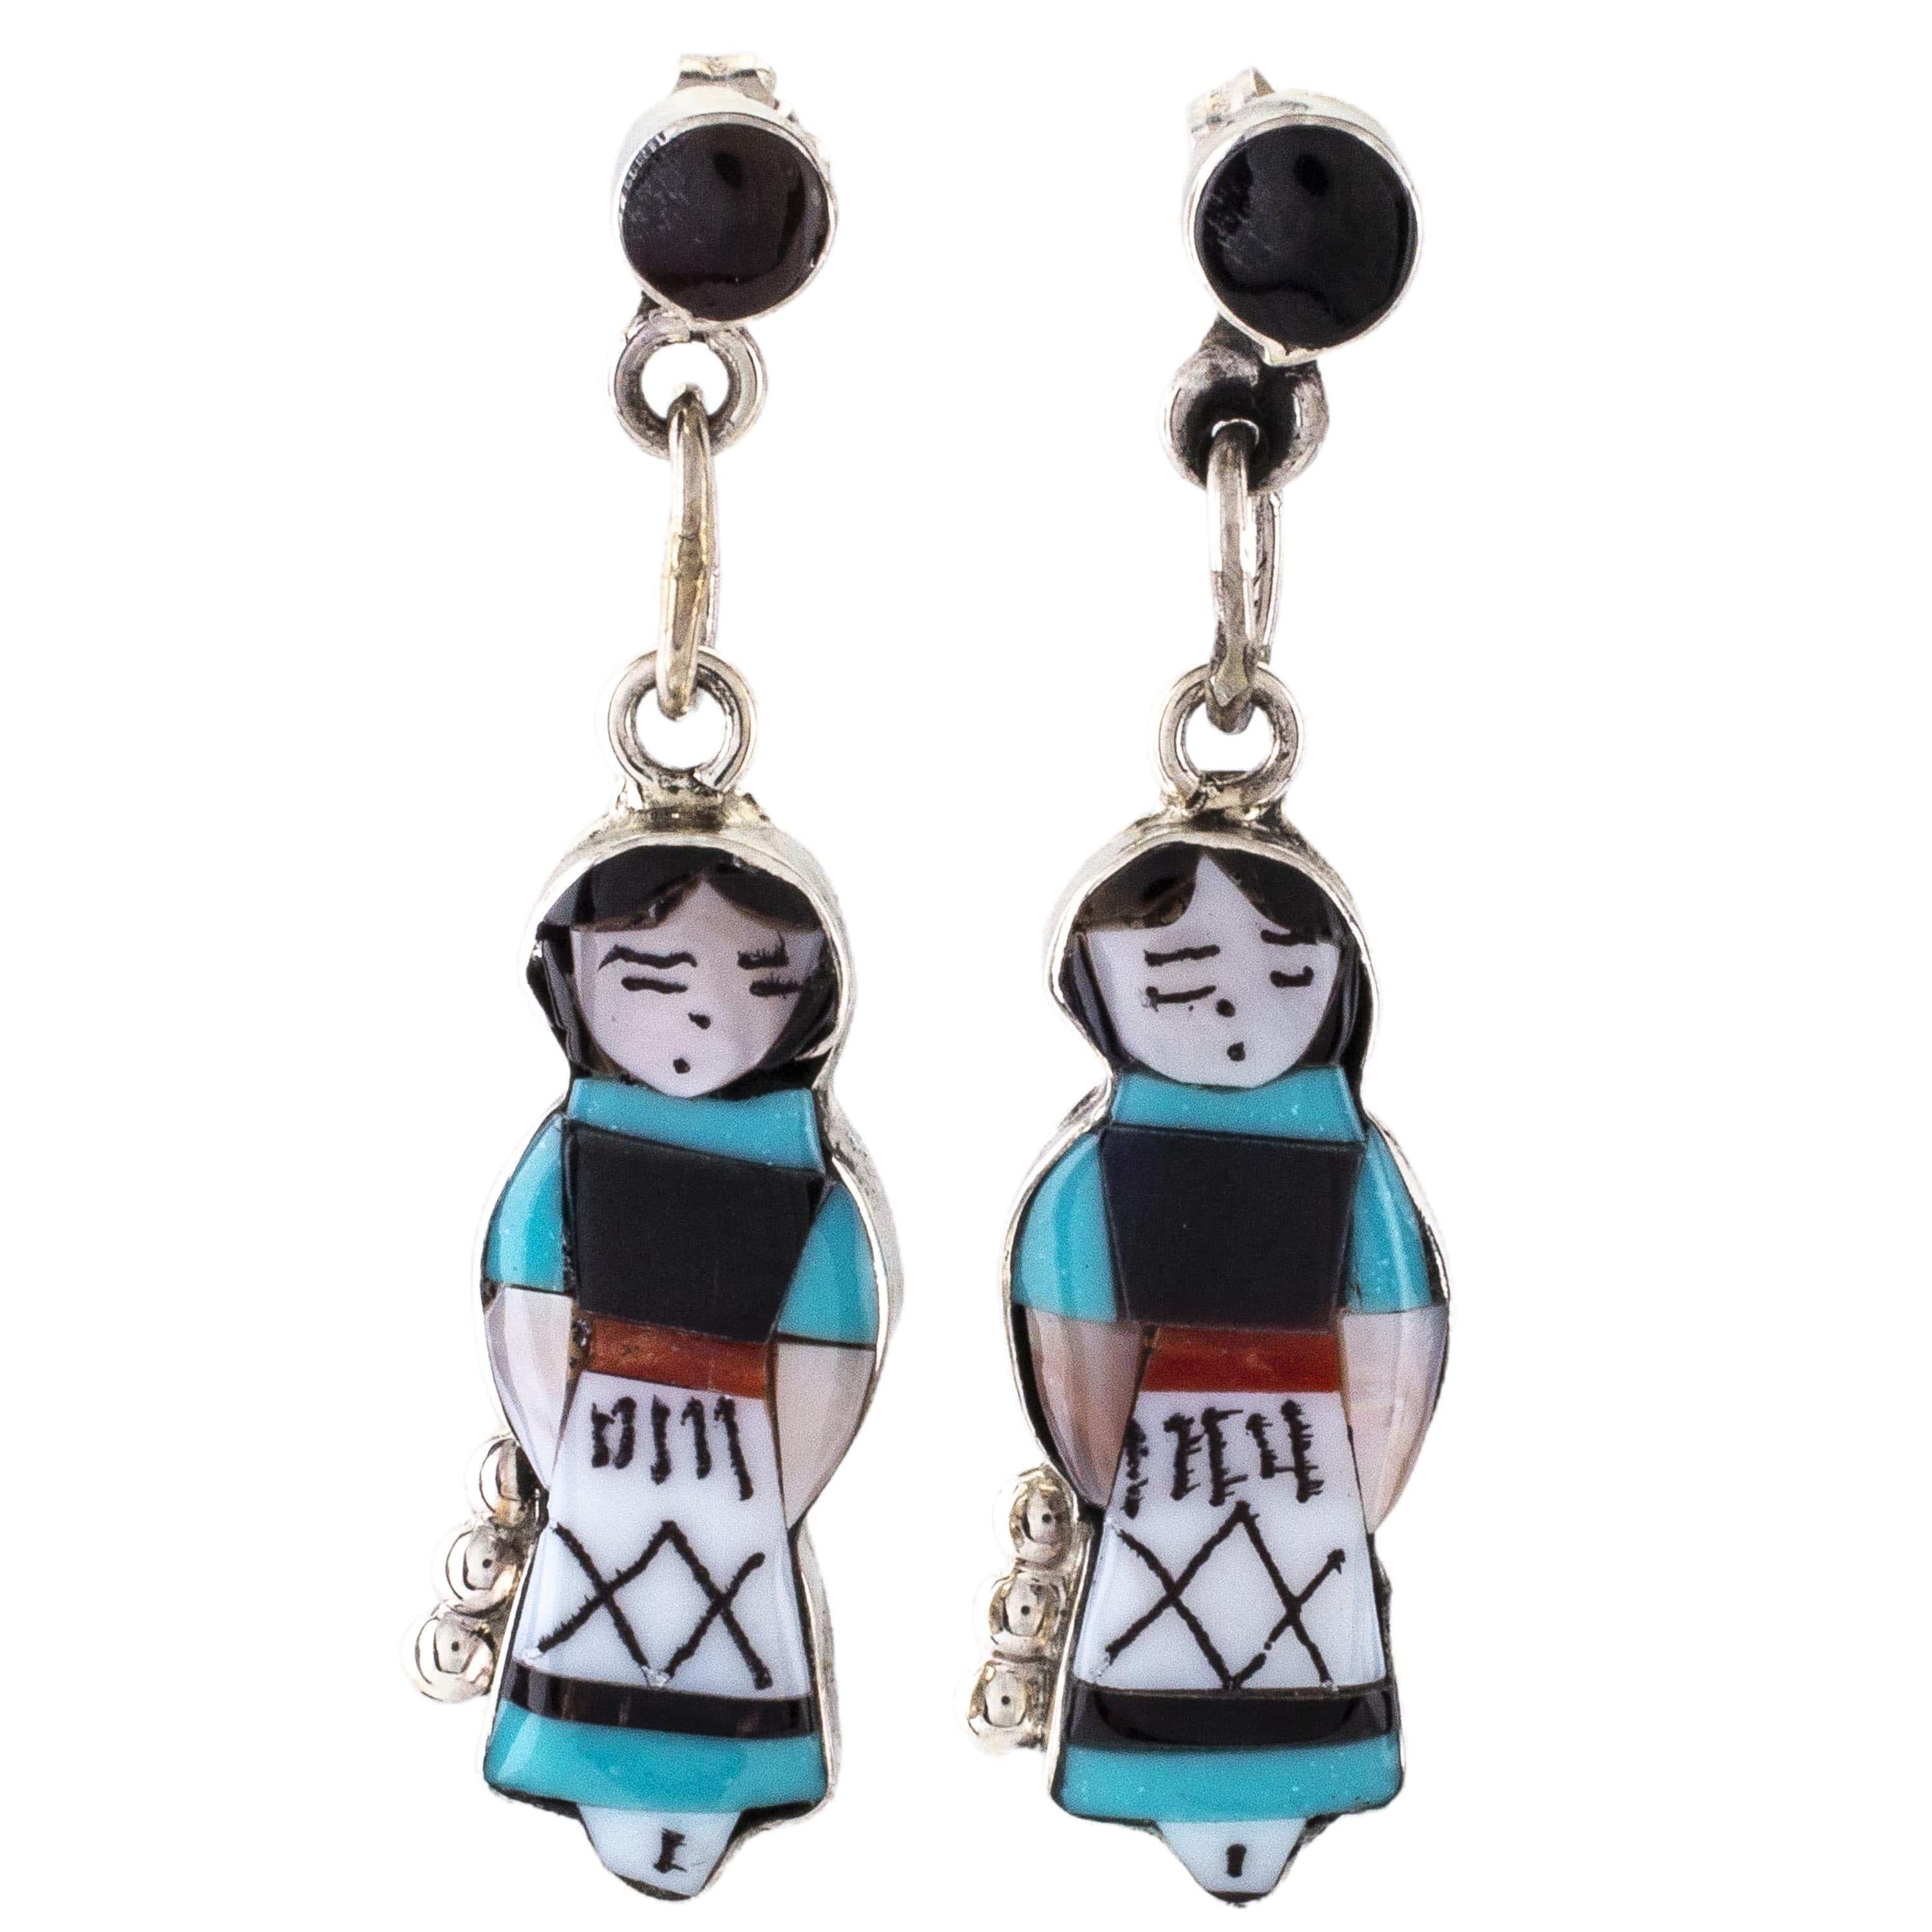 Kalifano Native American Jewelry Joyce Waseta Zuni Maiden with Mother of Pearl, Turquoise, Black Onyx, and Coral USA Native American Made 925 Sterling Silver Dangly Earrings NAE400.022